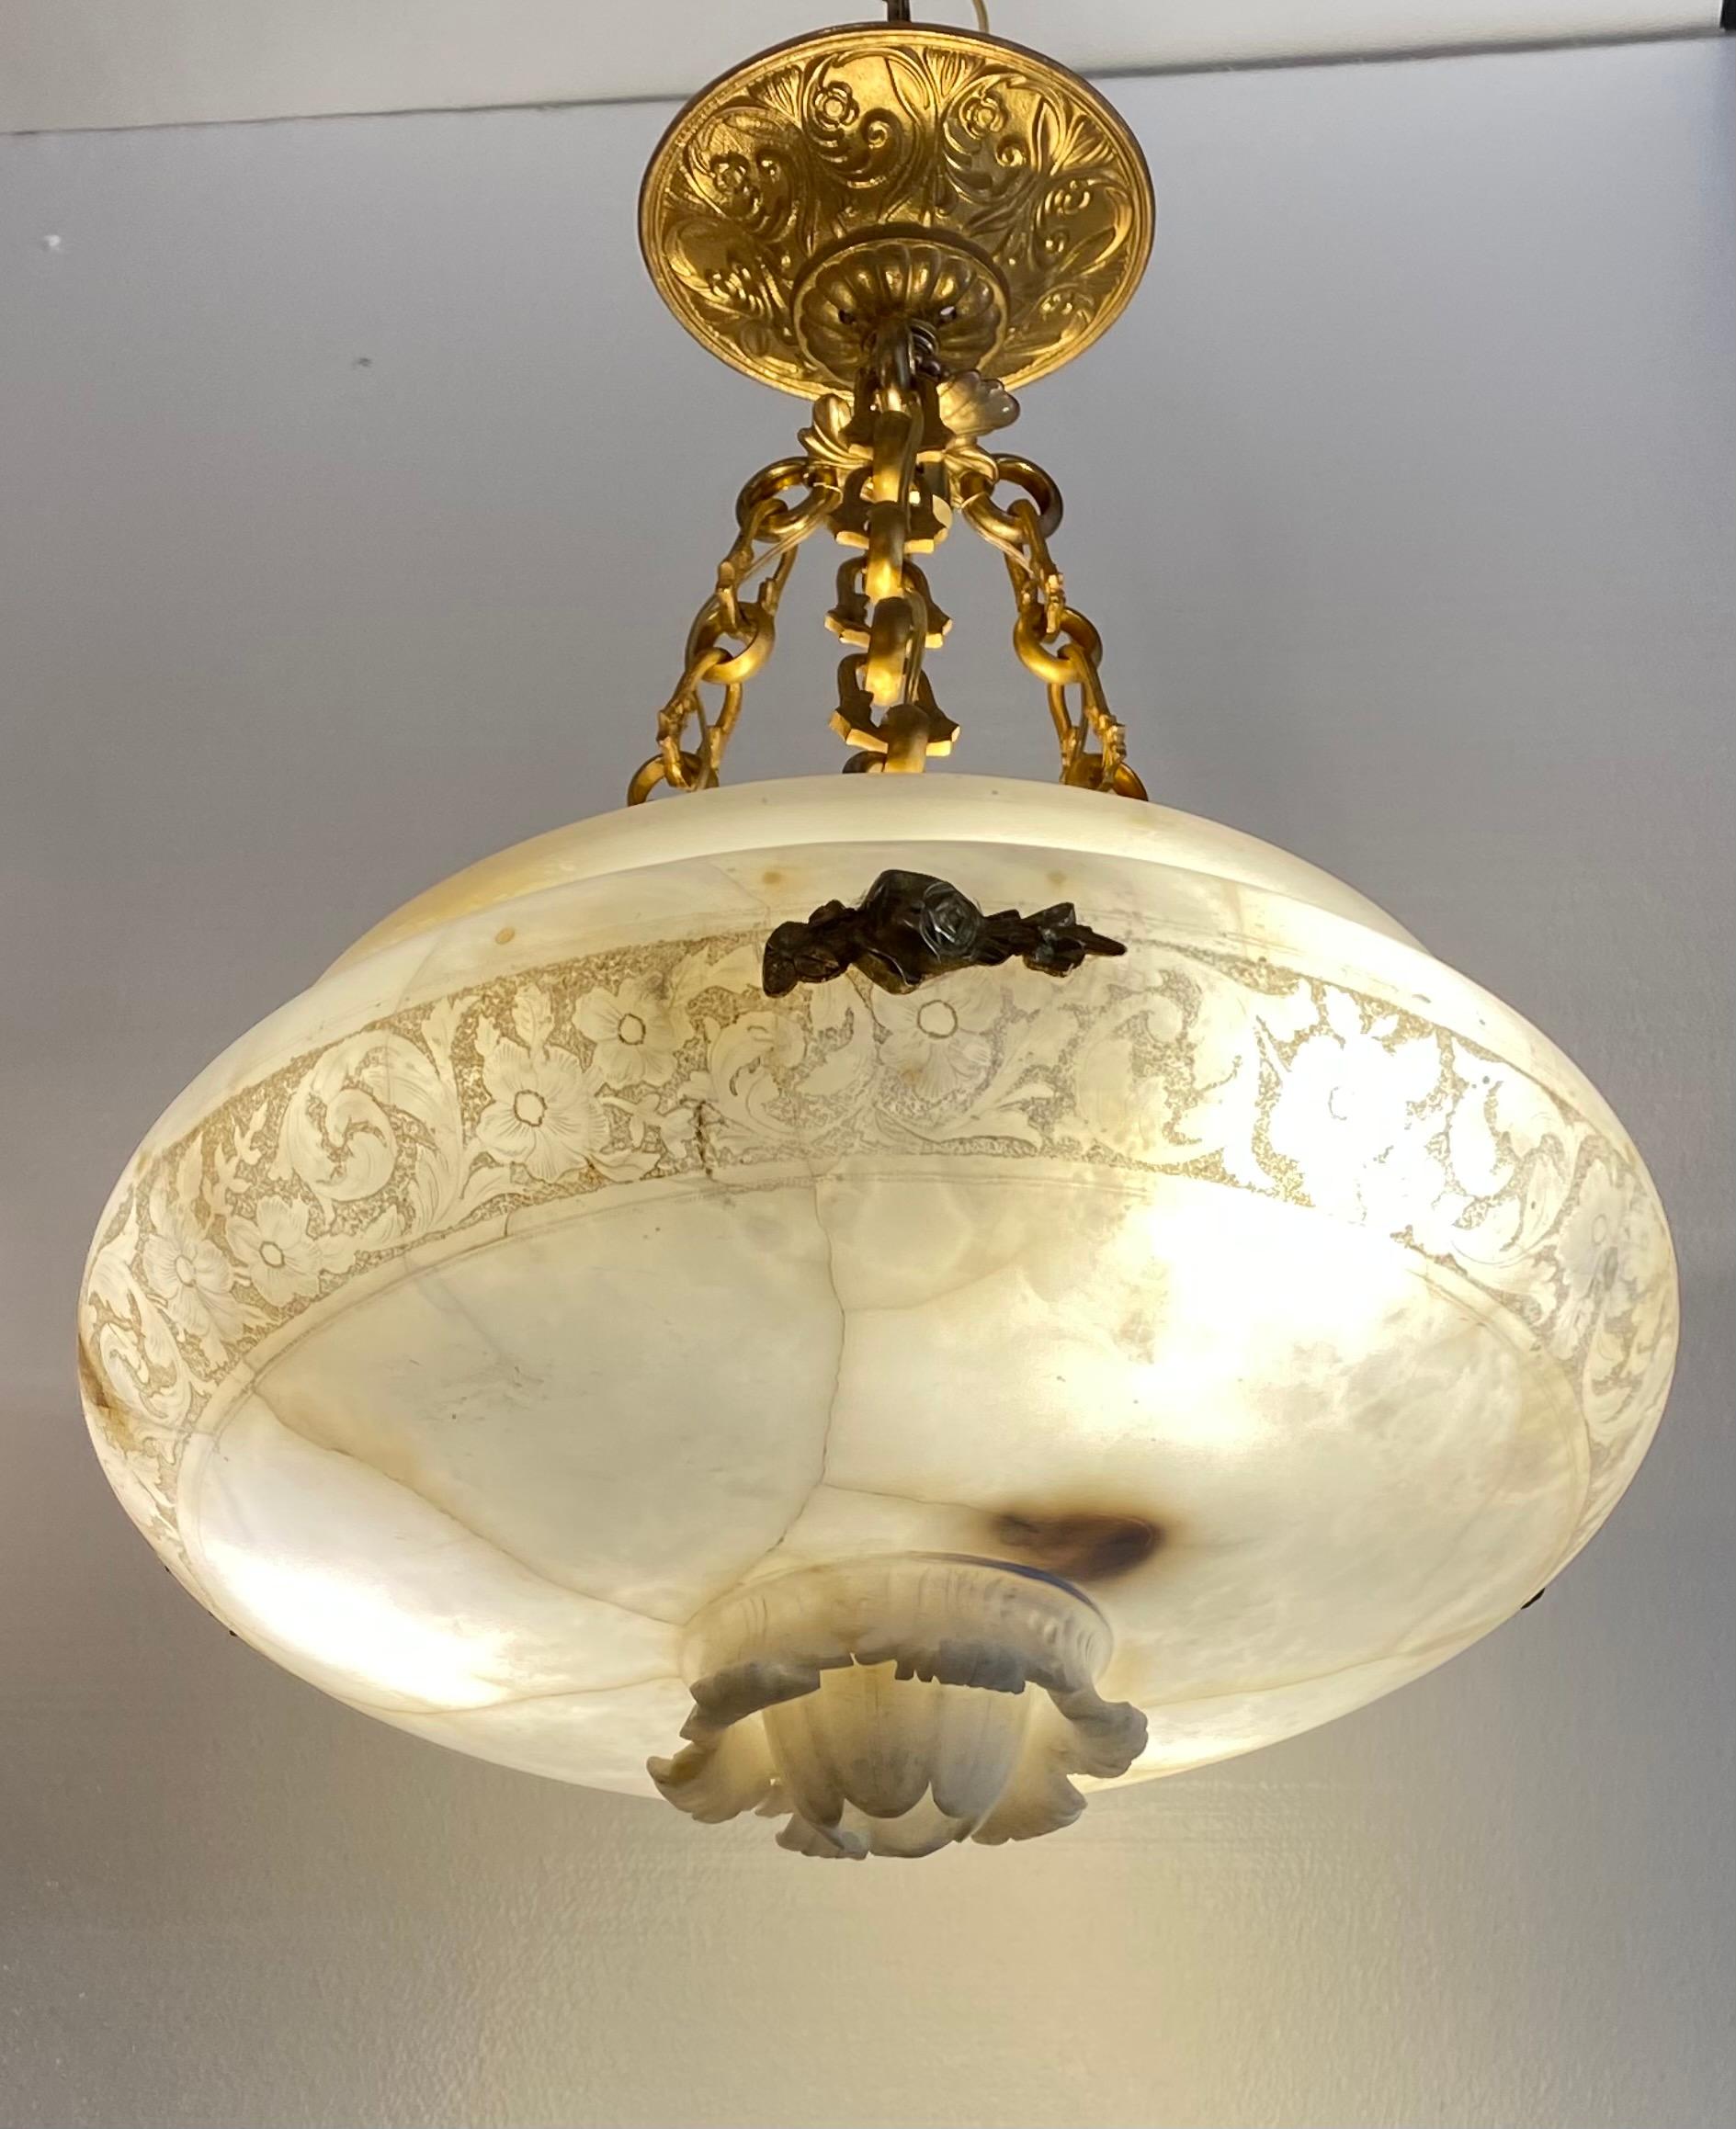 Fine vintage gilt bronze chandelier. Featured gold tone chains from which is held a circular alabaster shade with floral motifs. Good estate fresh condition.